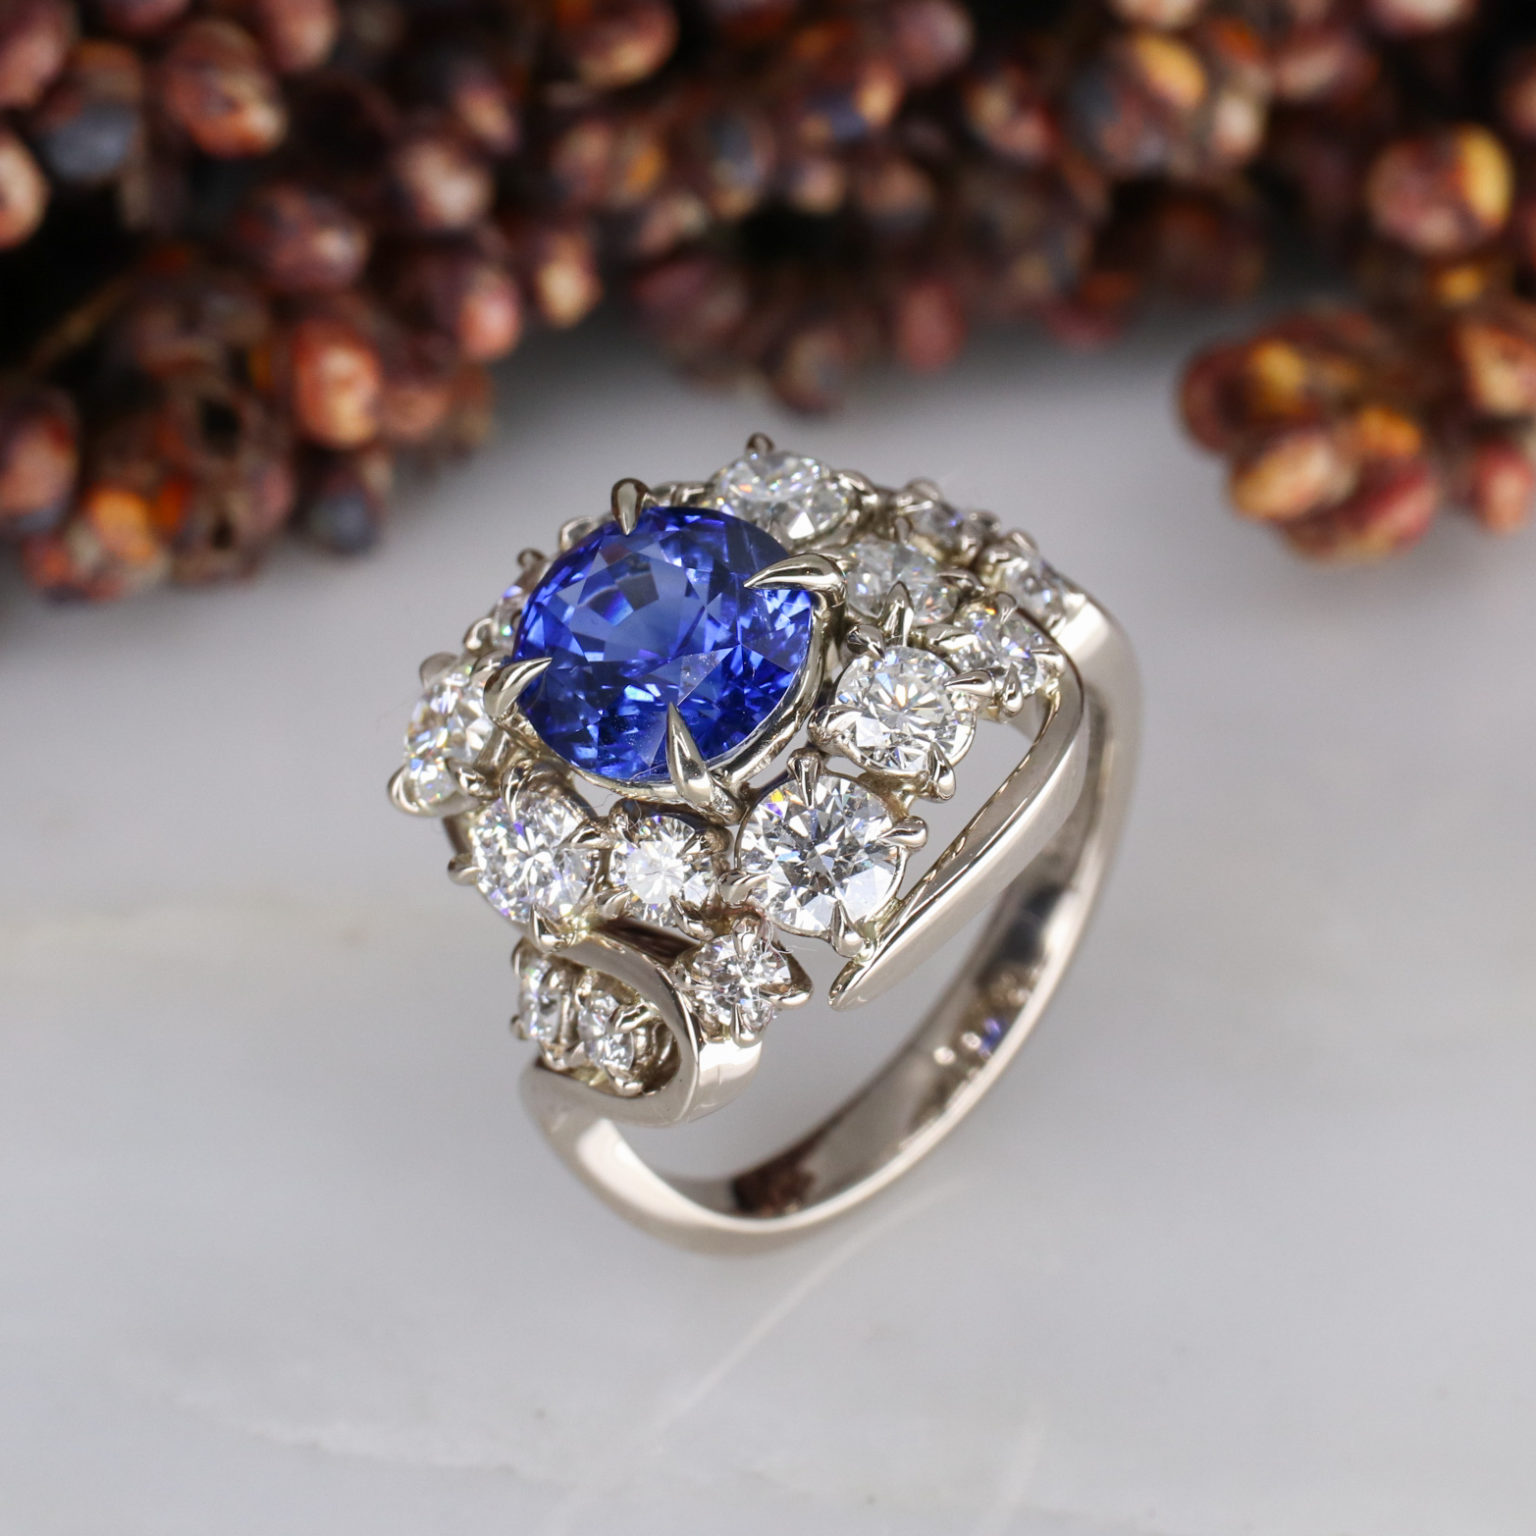 Engagement Rings Archives - Baroque Jewellery